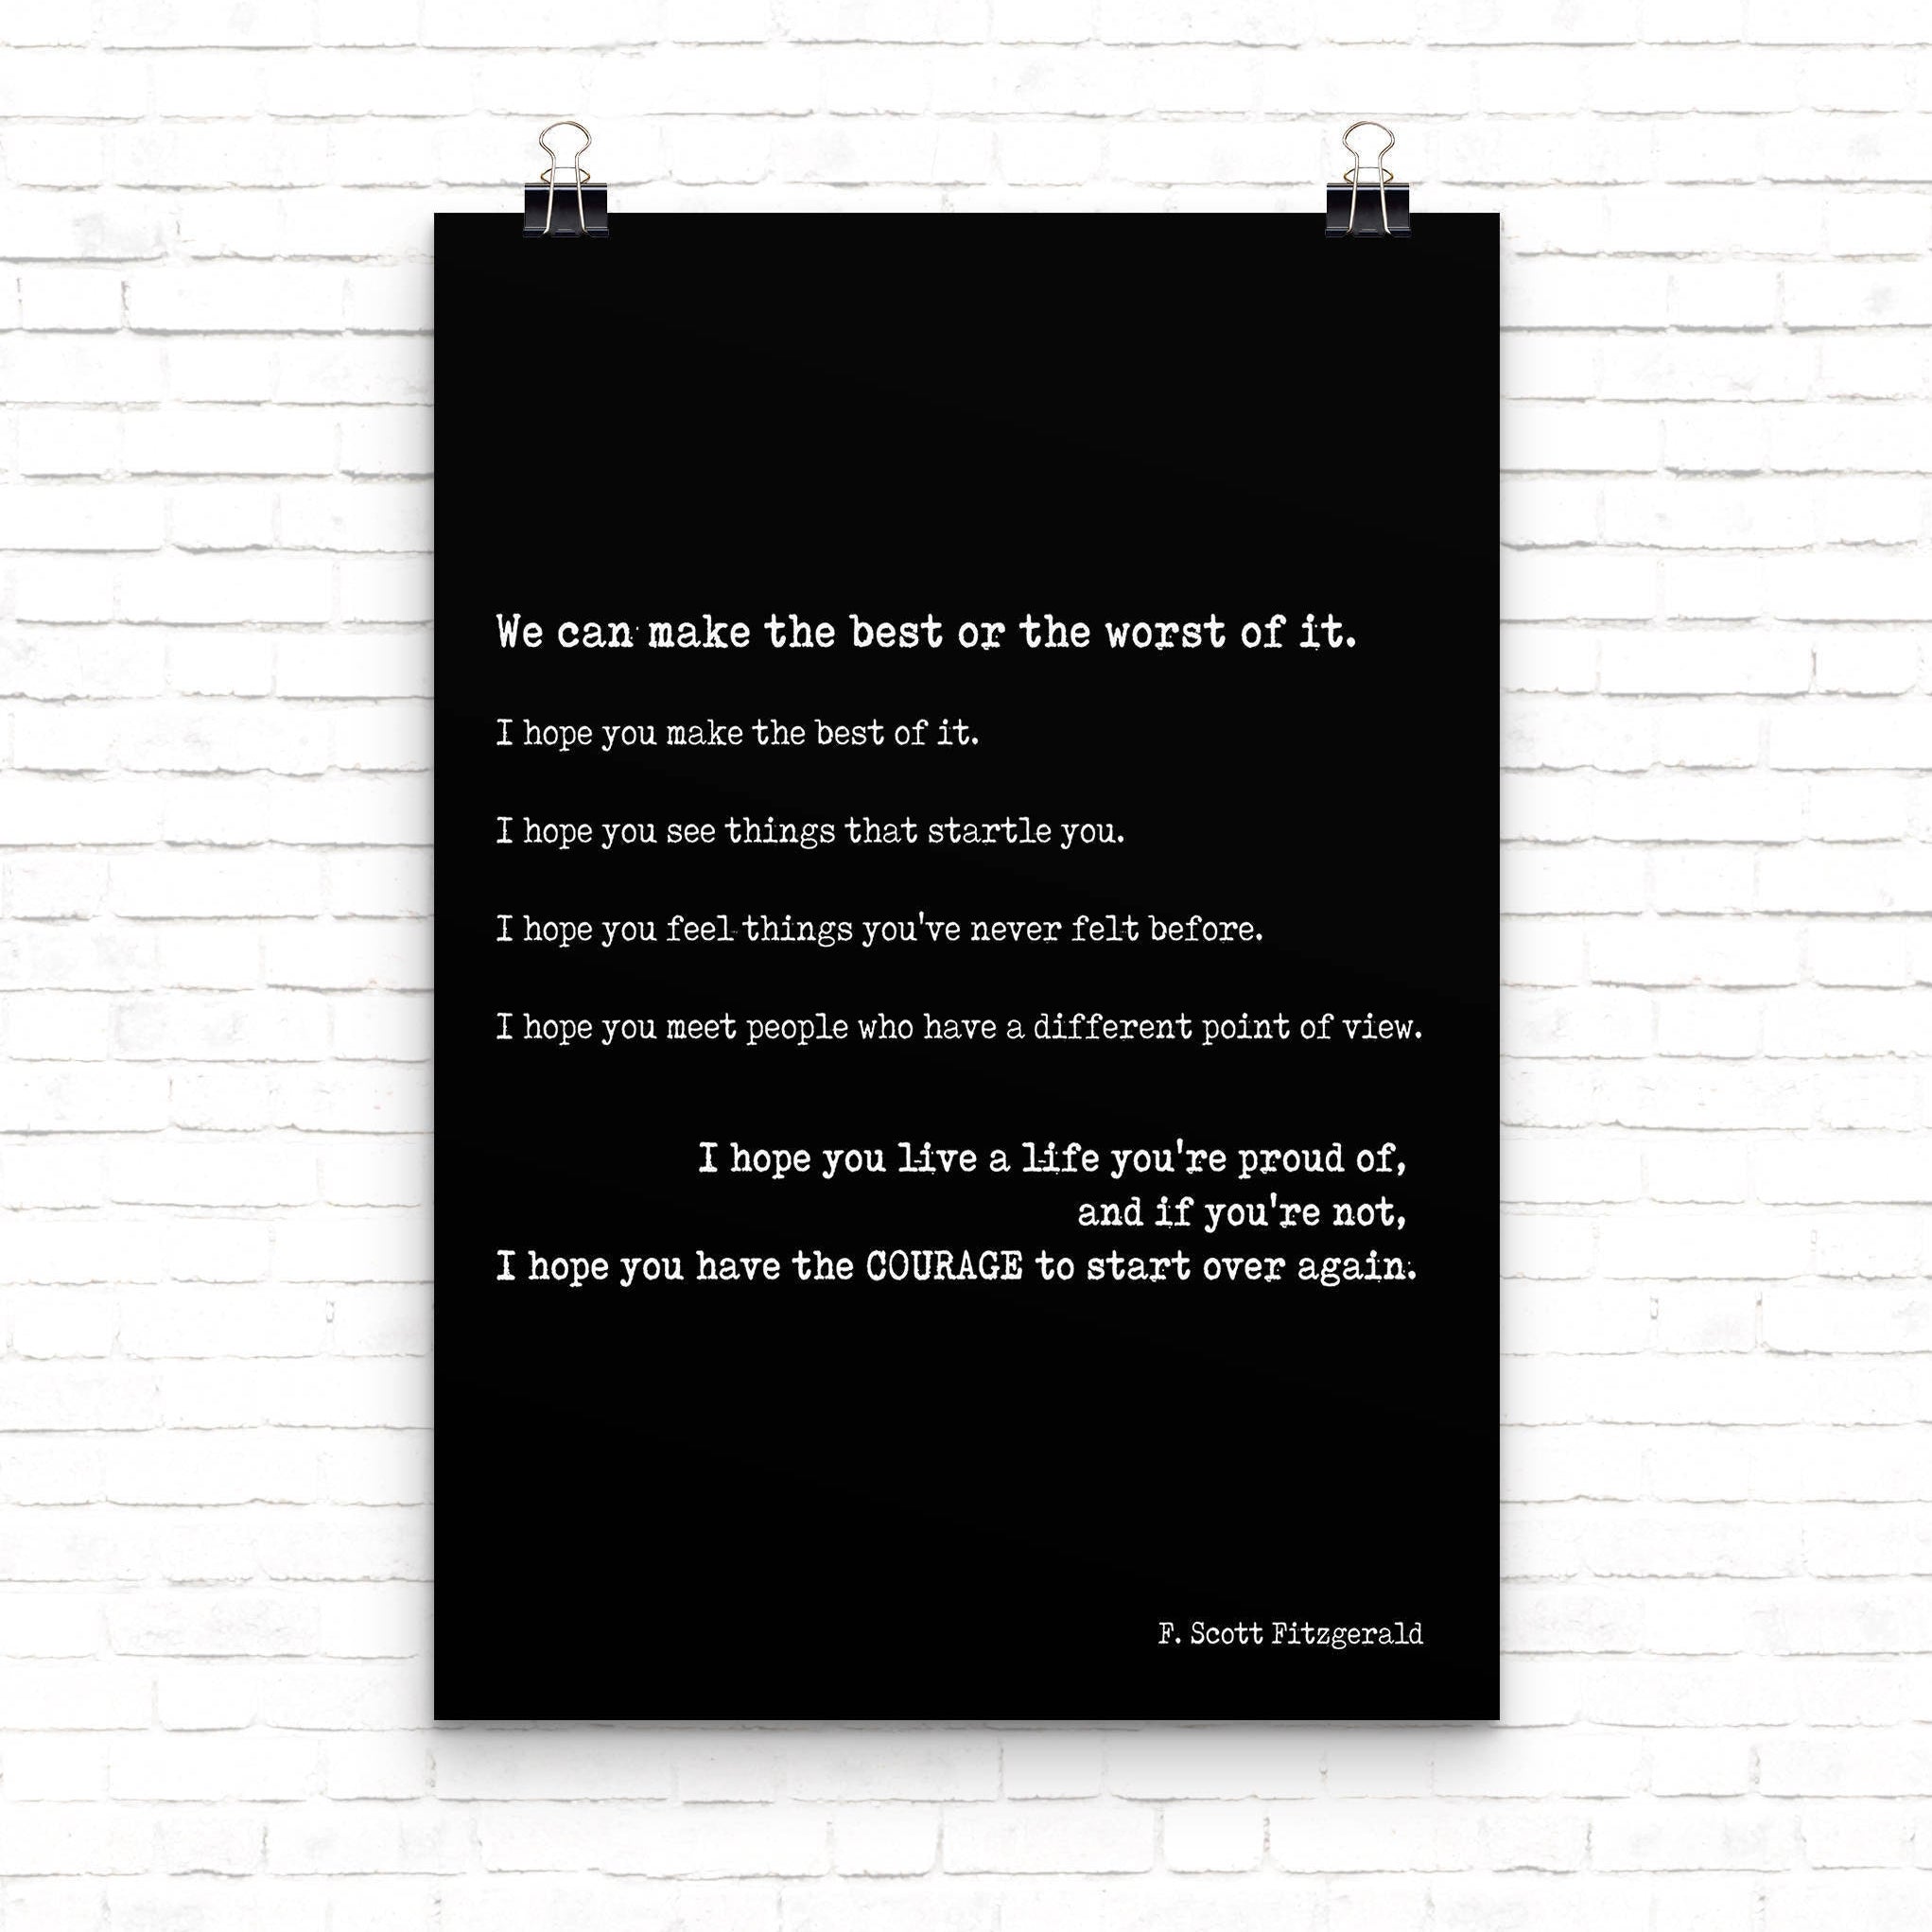 Scott Fitzgerald Make The Best Of It Quote Inspirational Print, Life Quote Motivational Poster